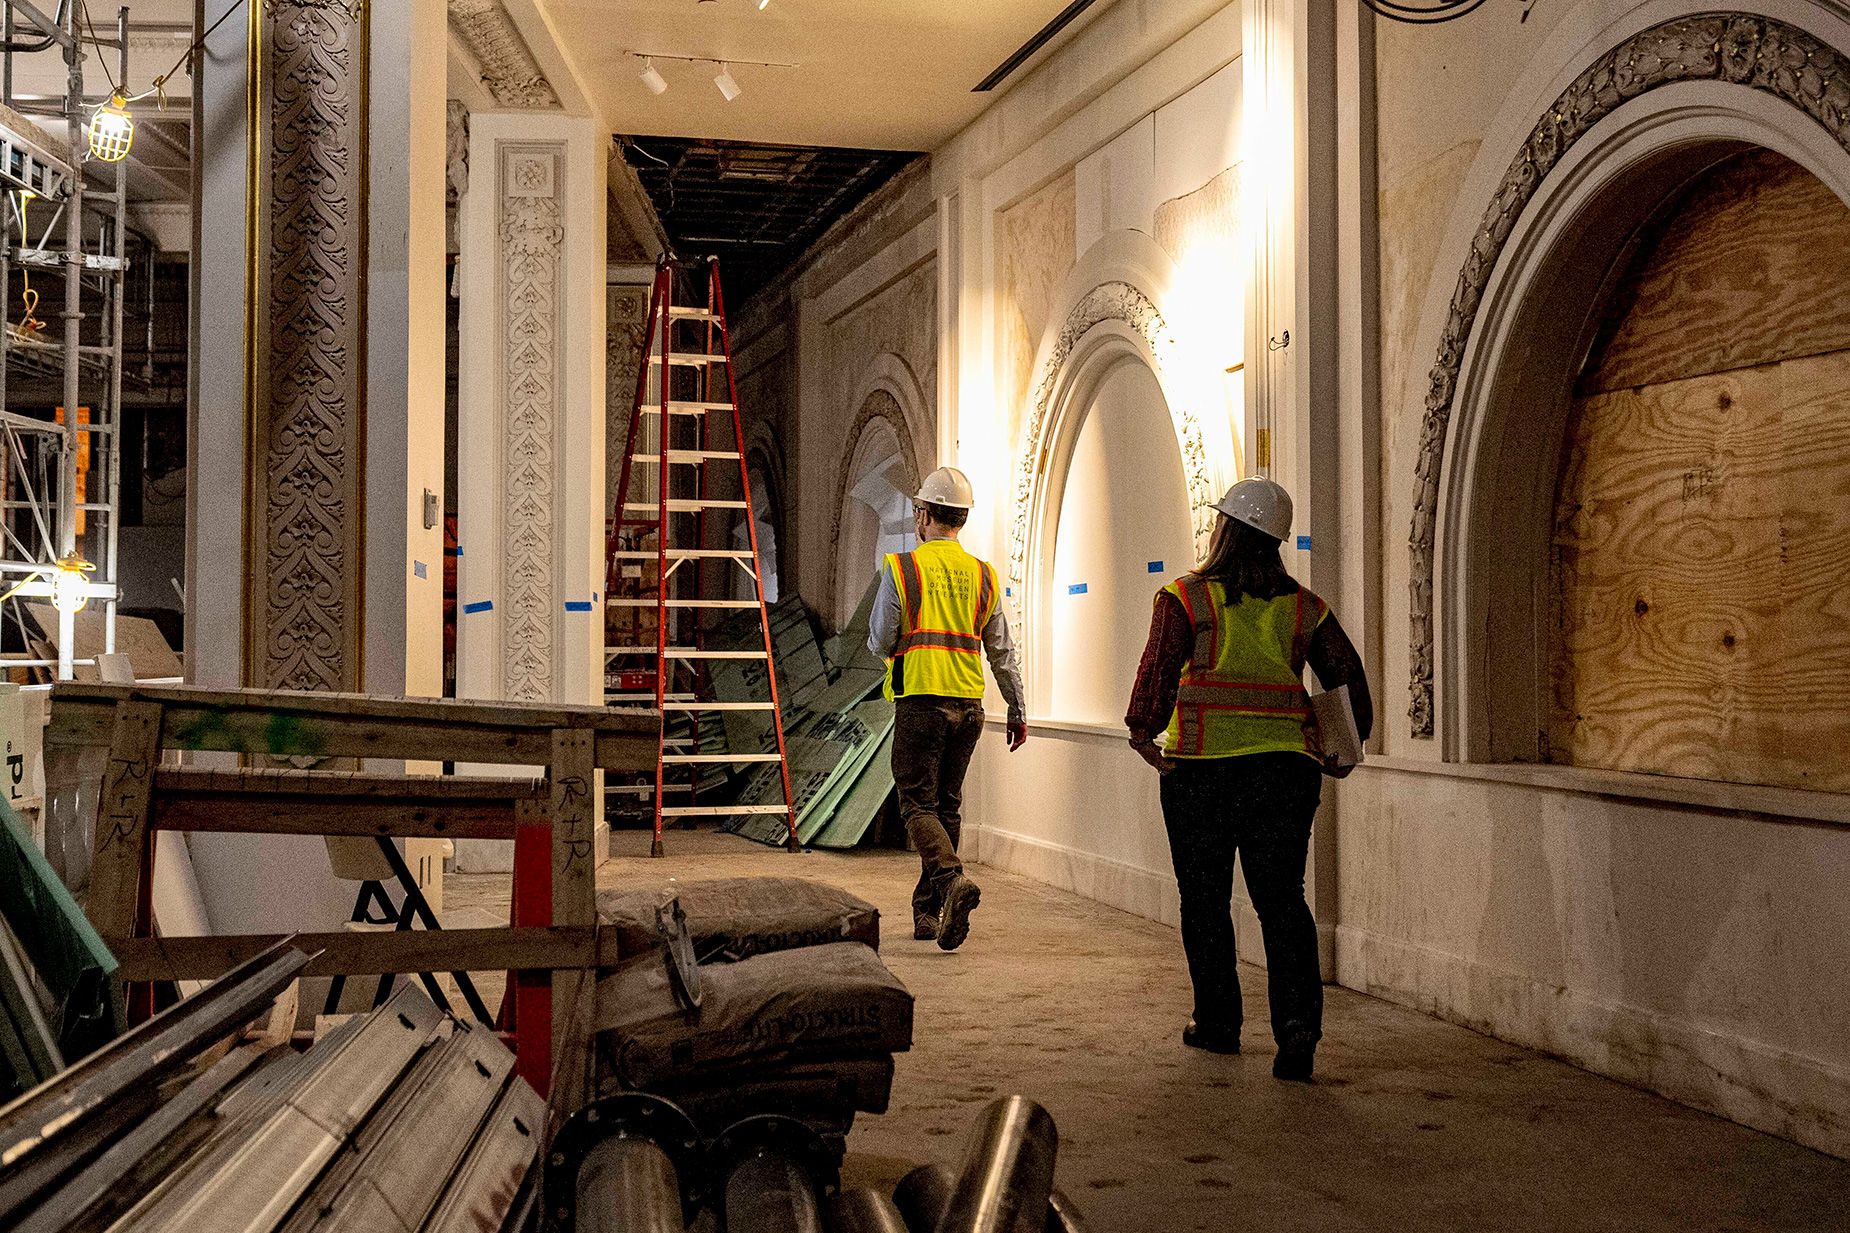 The Great Hall is visible during a media preview of a $67.5 million dollar major renovation of the National Museum of Women in the Arts in Washington, Wednesday, Feb. 15, 2023. The museum is set to reopen October 21, 2023. (AP Photo/Andrew Harnik)